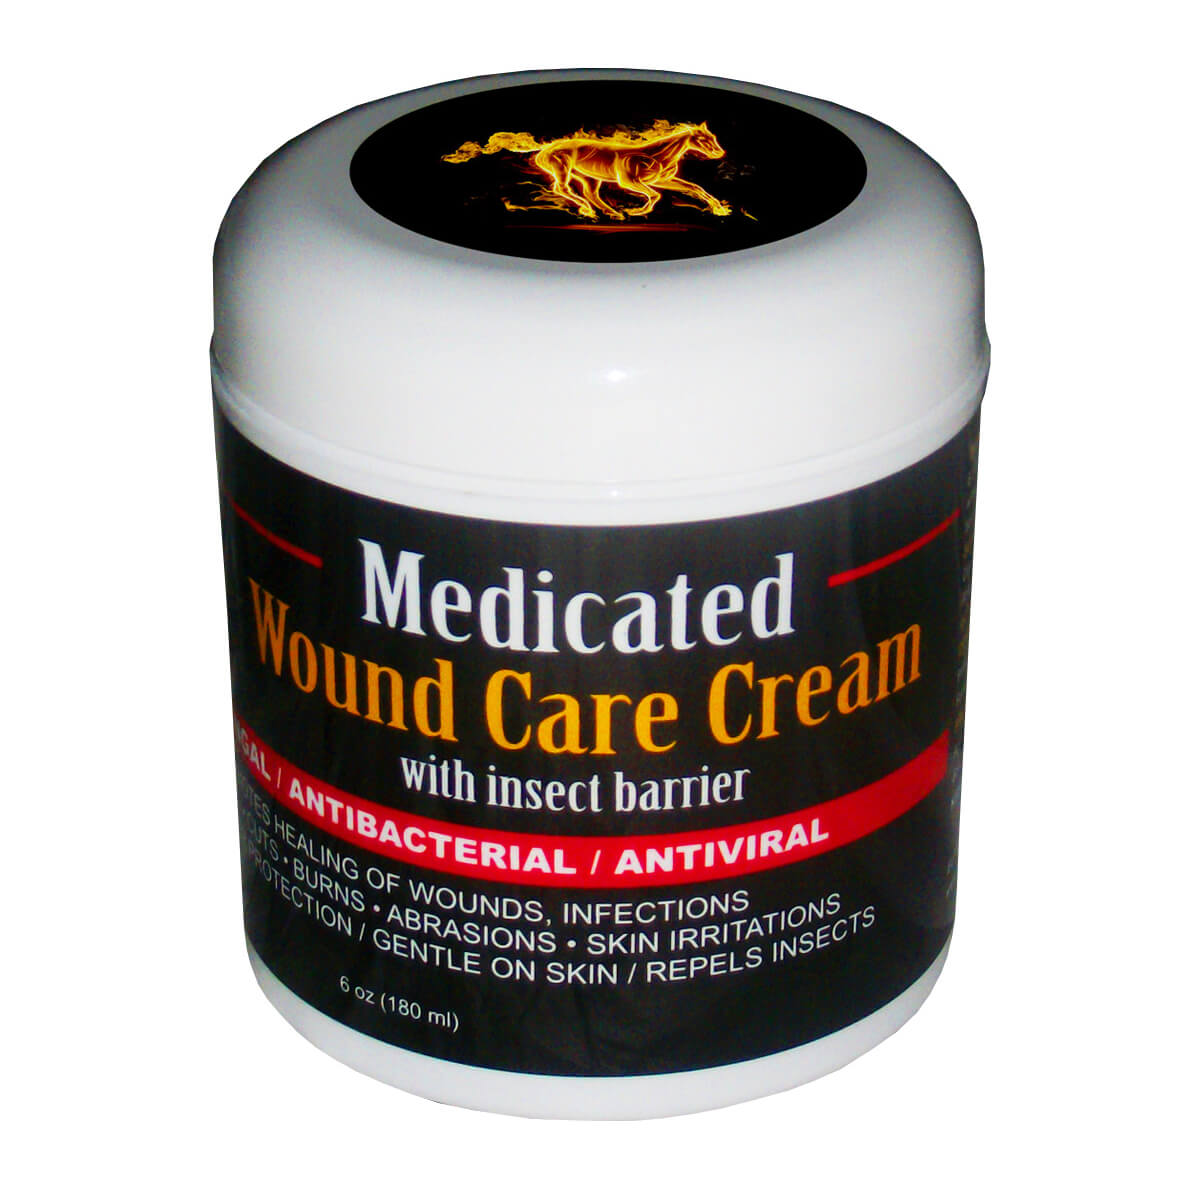 wound care cream product